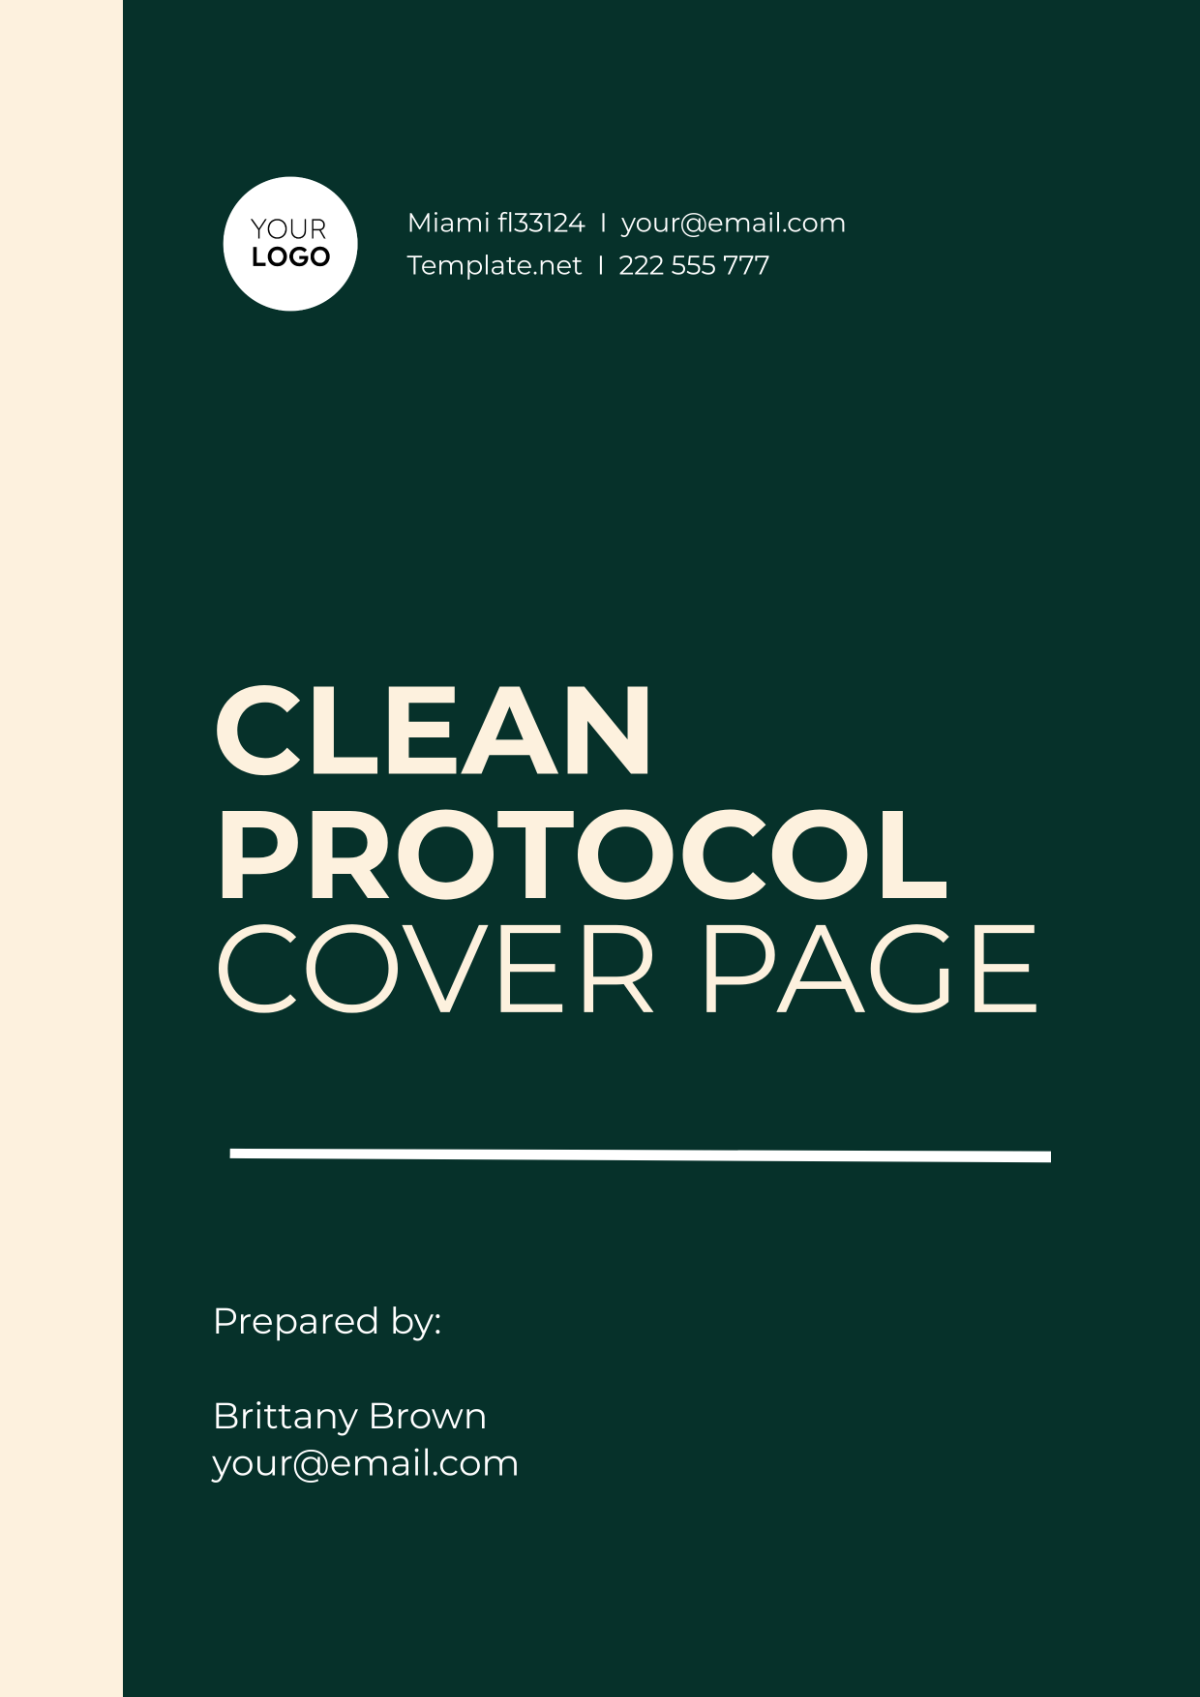 Clean Protocol Cover Page Template